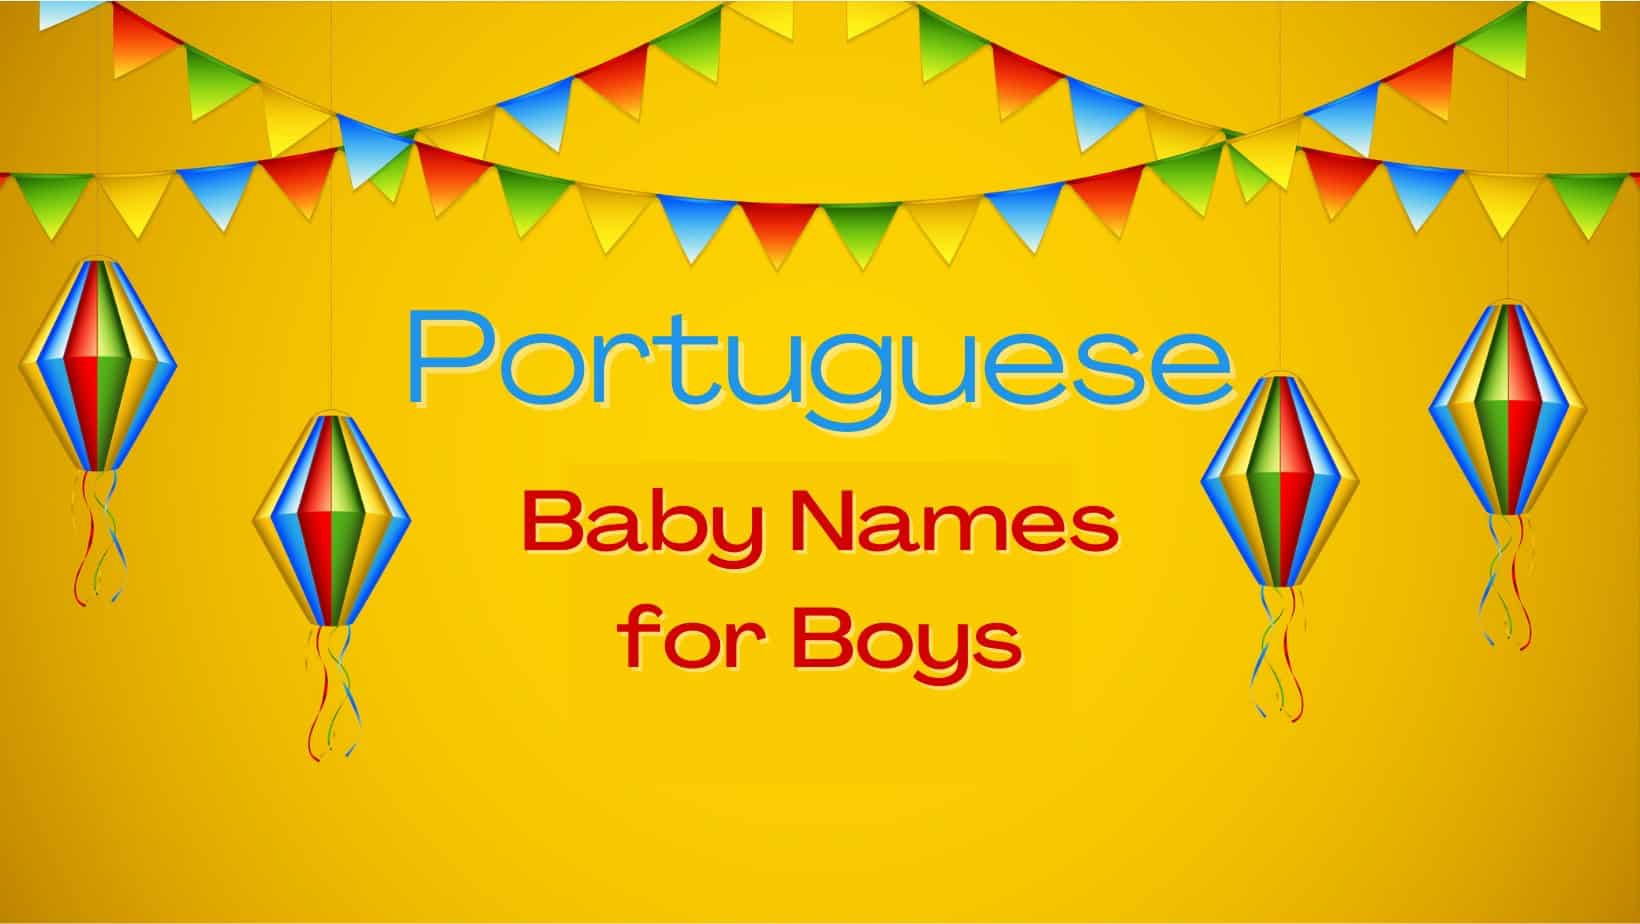 Portuguese baby names for boys